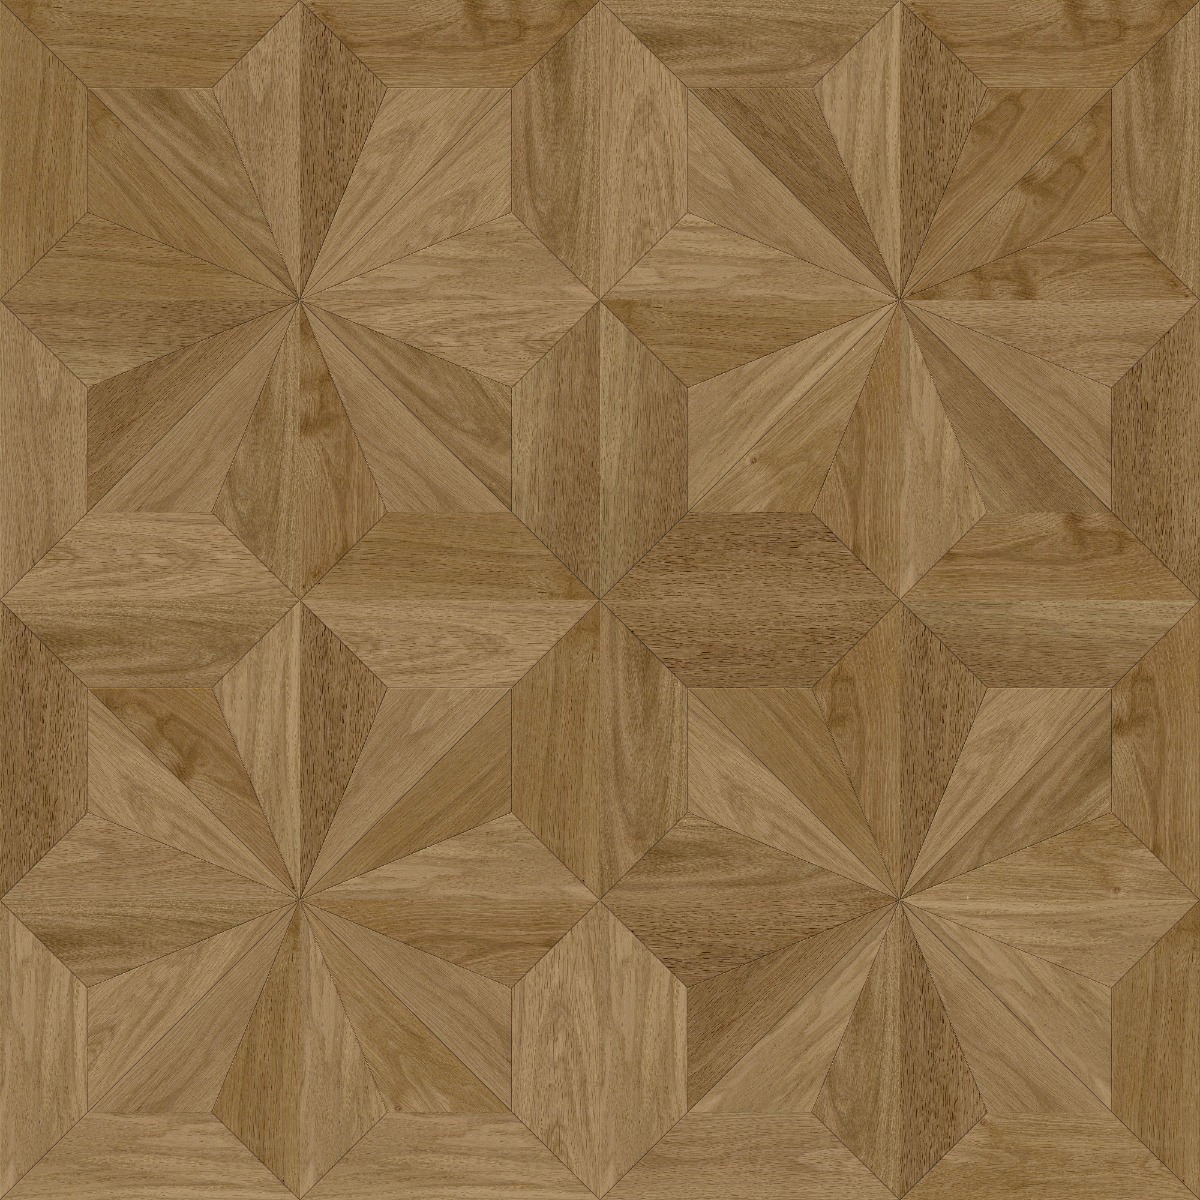 A seamless wood texture with expressive 152 boards arranged in a Diamond Continuous Versailles pattern